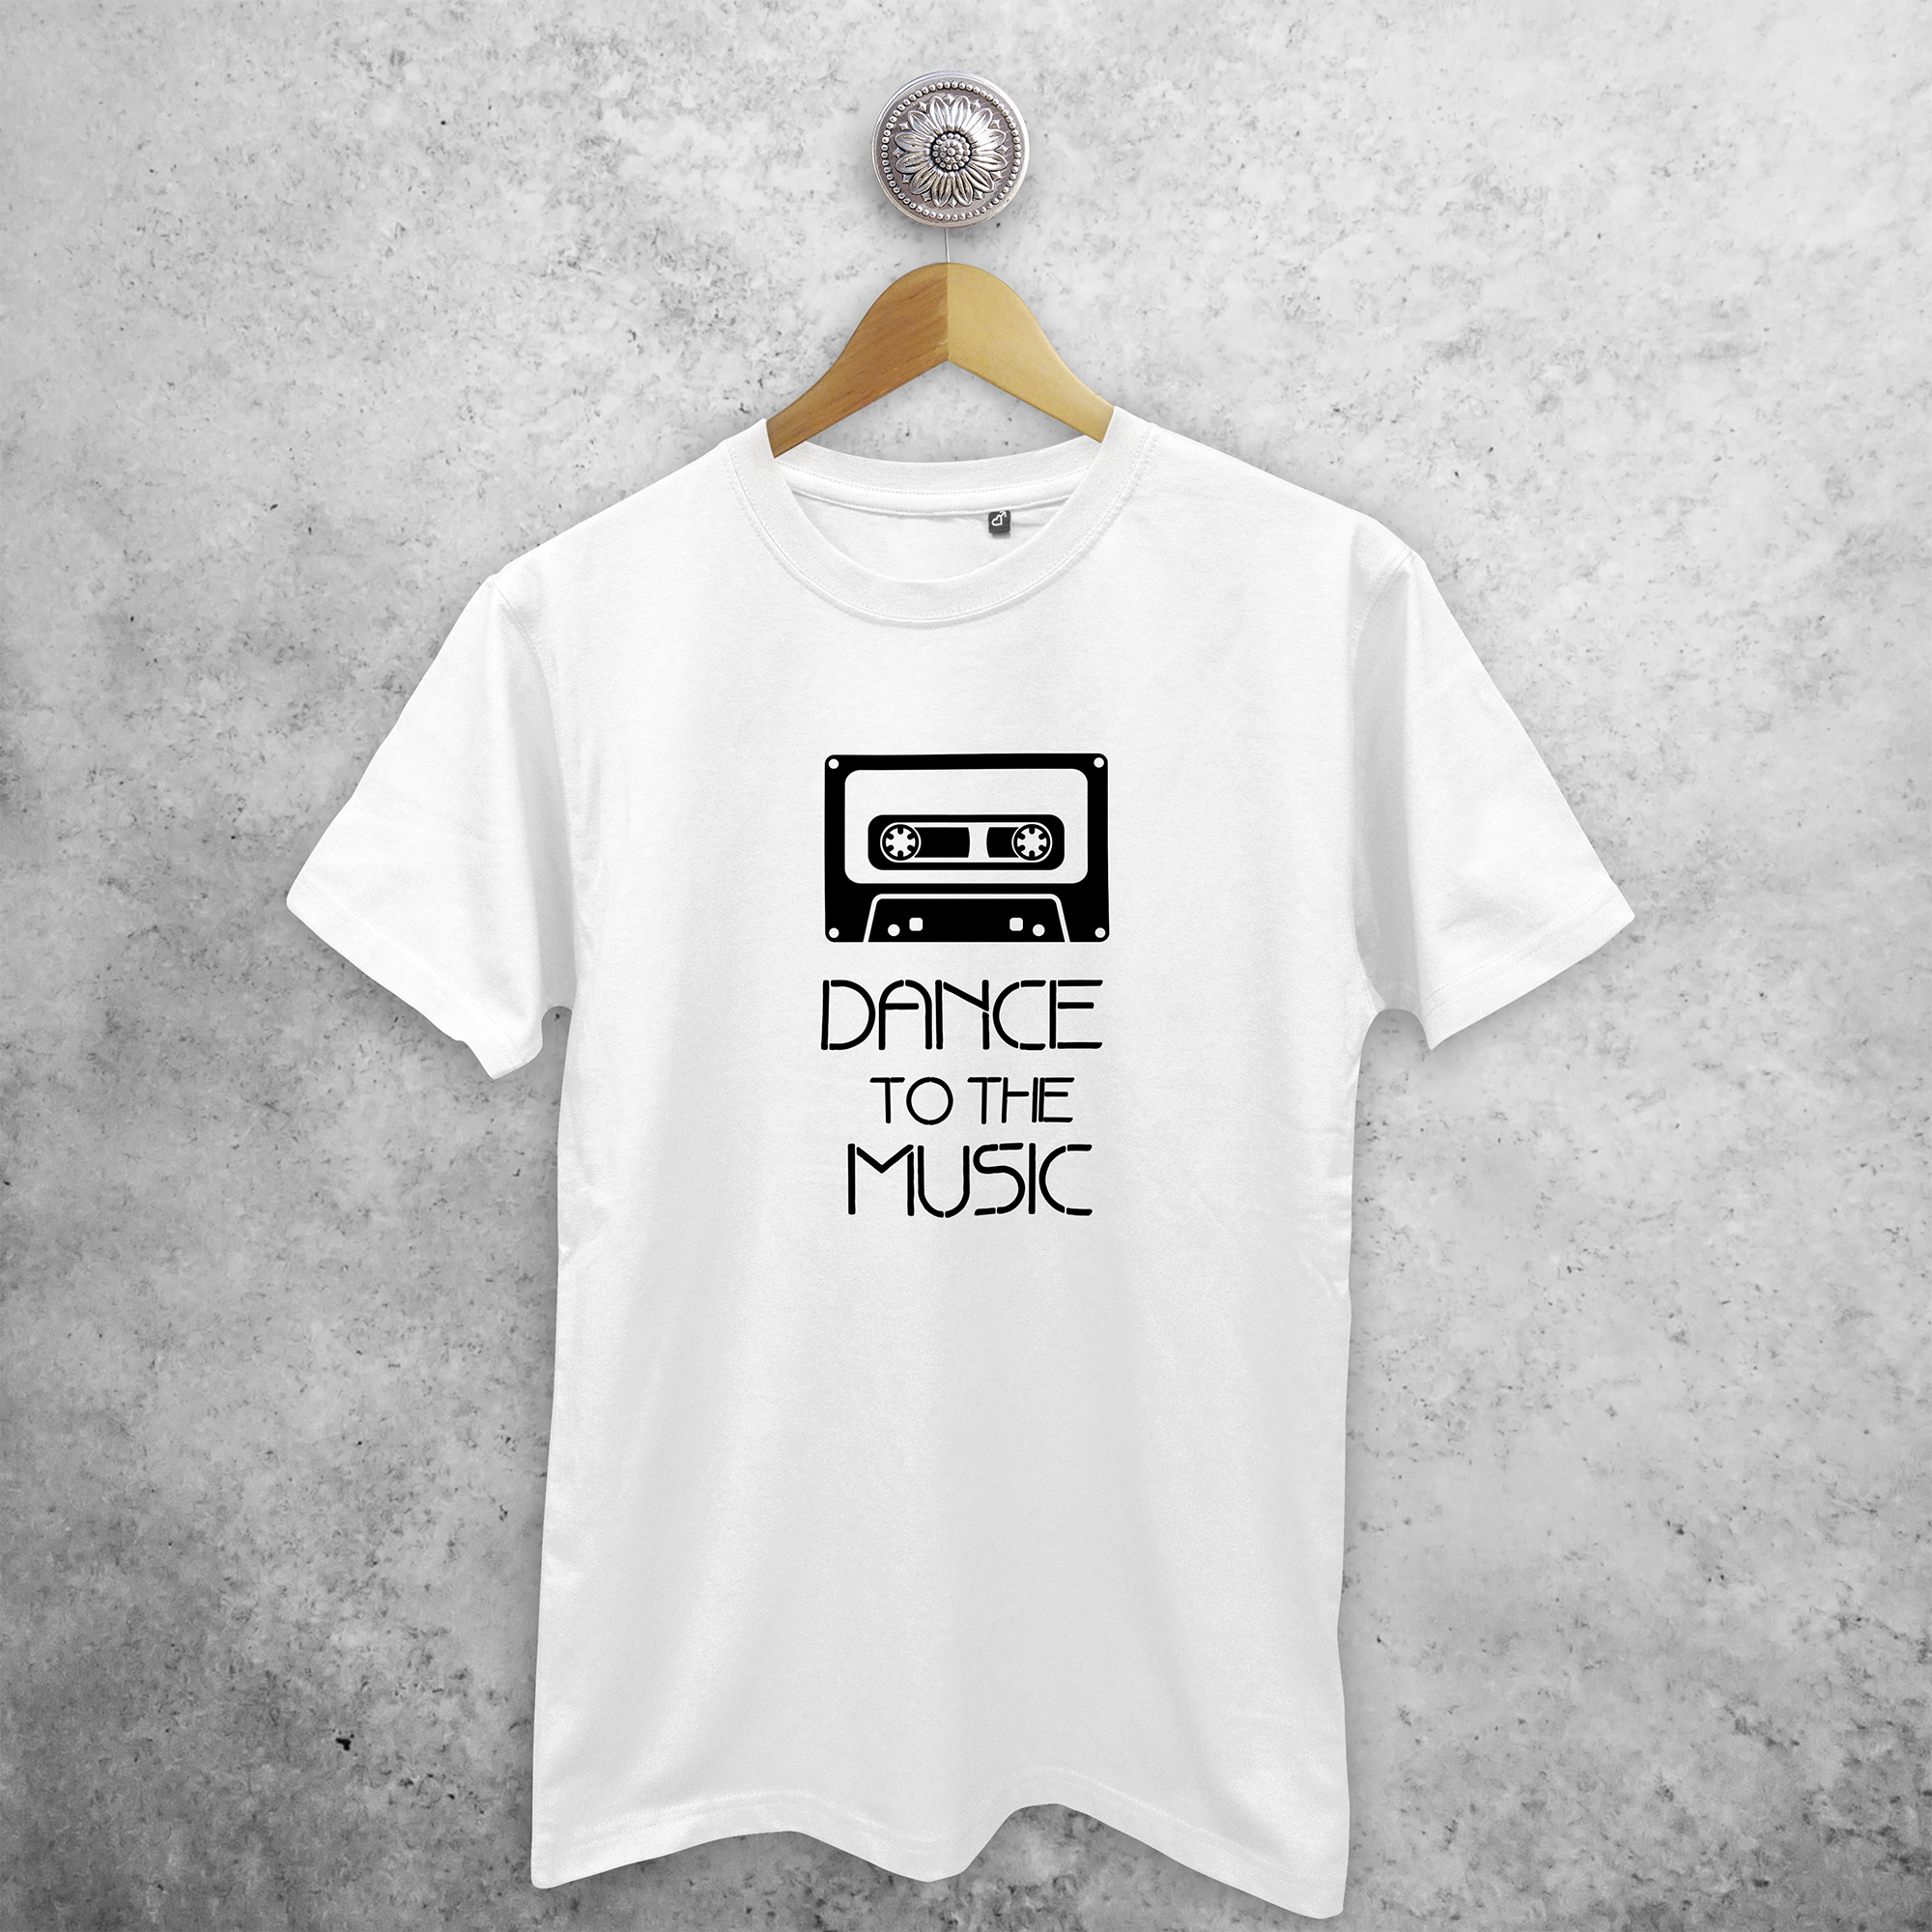 'Dance to the music' adult shirt